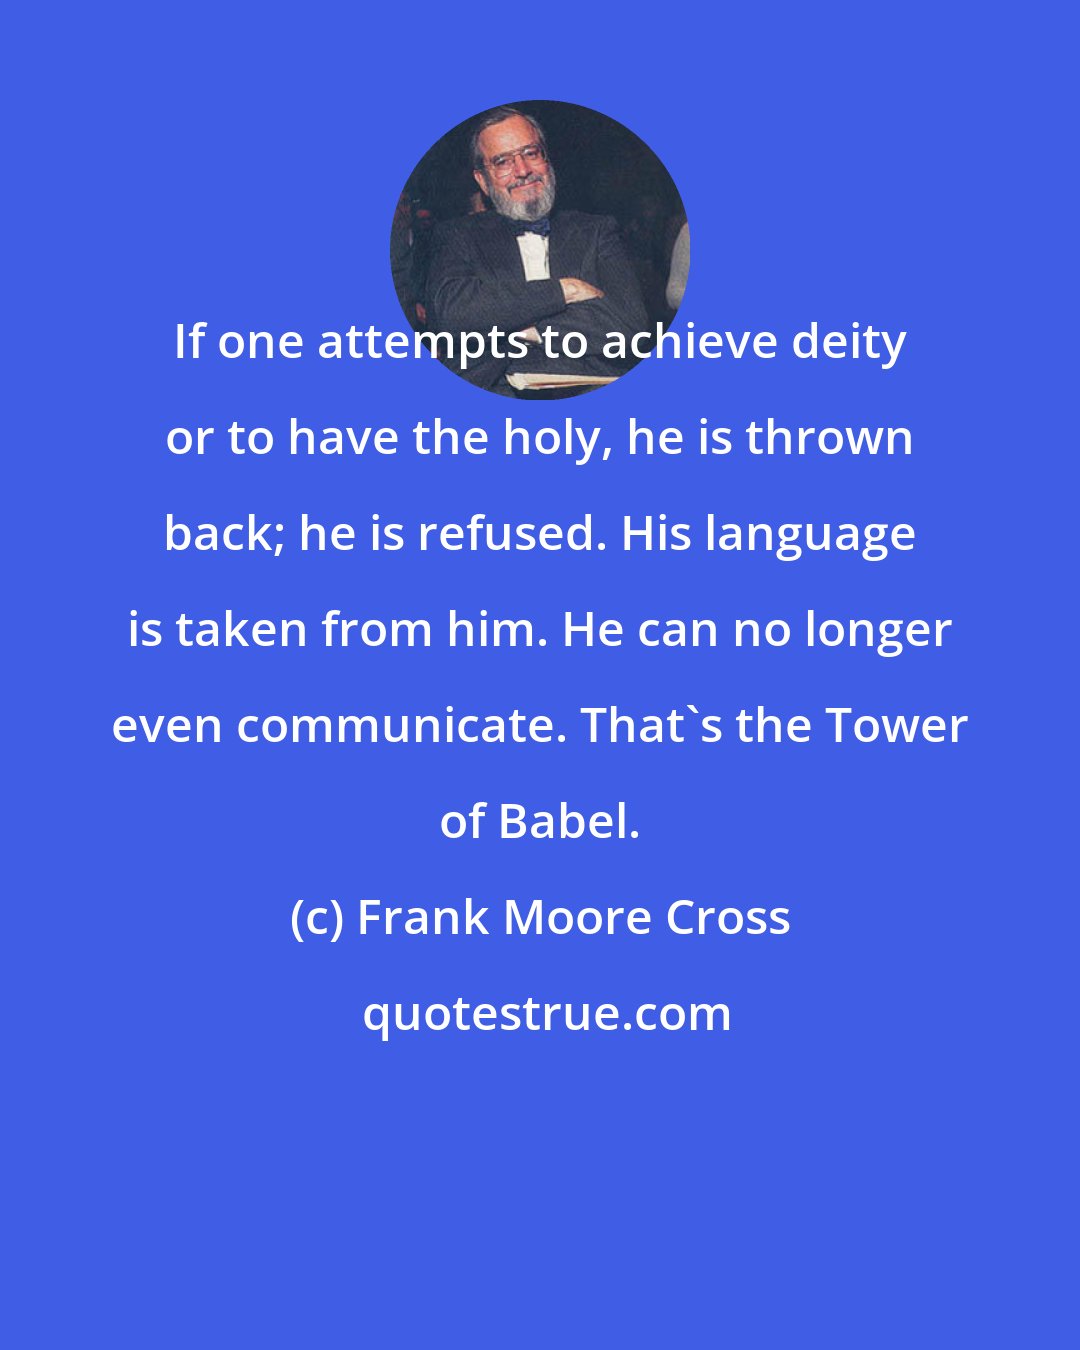 Frank Moore Cross: If one attempts to achieve deity or to have the holy, he is thrown back; he is refused. His language is taken from him. He can no longer even communicate. That's the Tower of Babel.